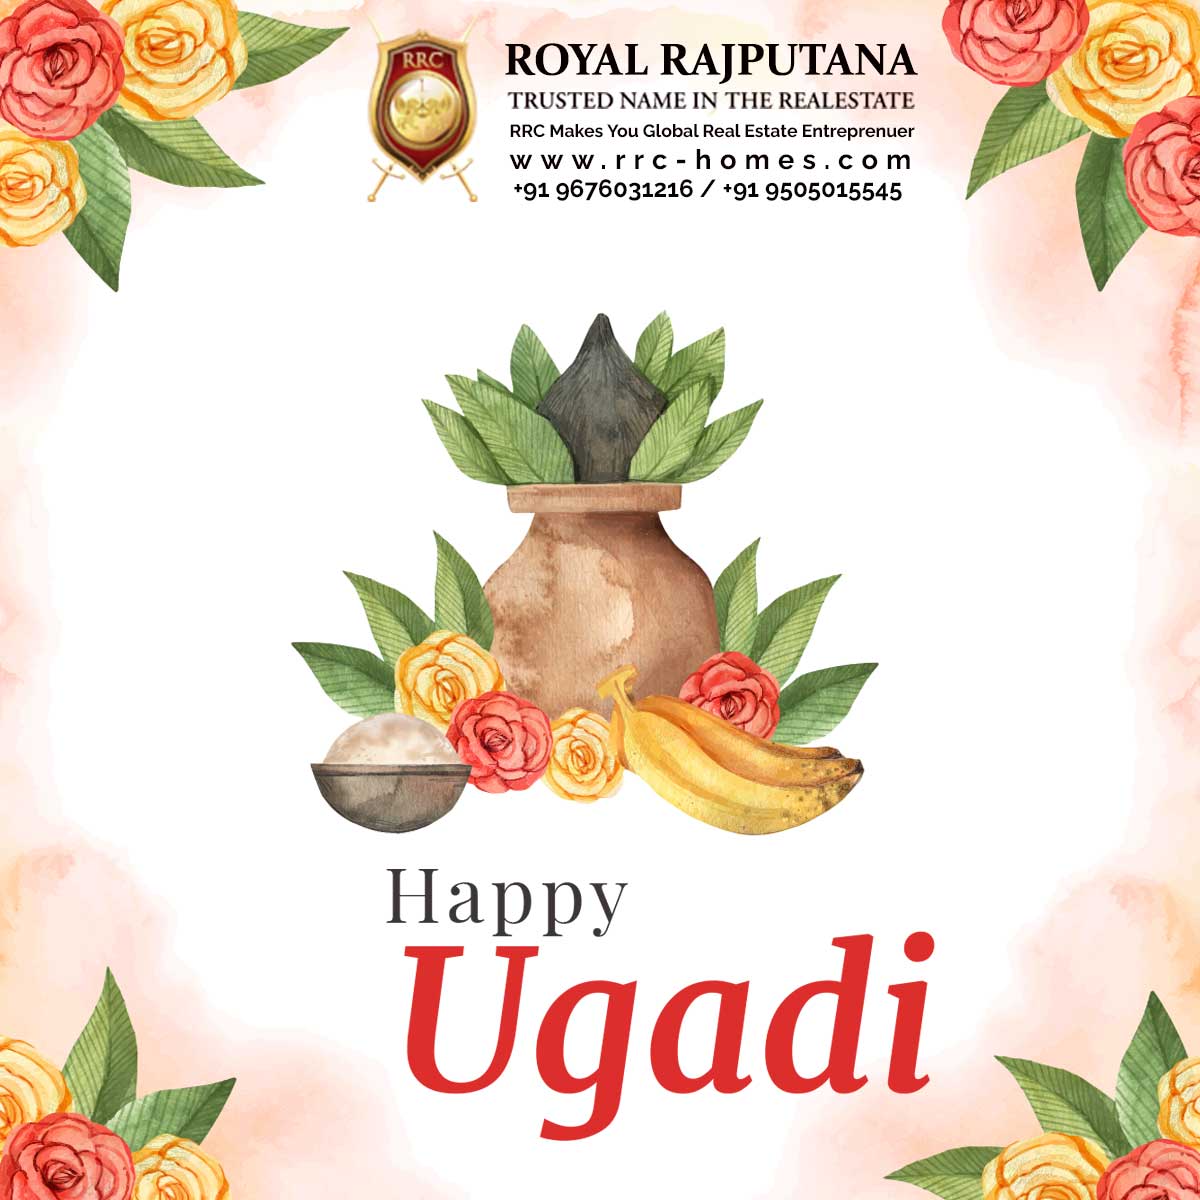 Happy Ugadi..!
May the festival of Ugadi fill your life with success, prosperity, and happiness.

#royalrajputana #royalrajputanahomes #rrc #rrchomes  #properties #aboutrrc #motivational #quote #positive #negative #situation #happy #ugadi #prosperity #happiness #festival